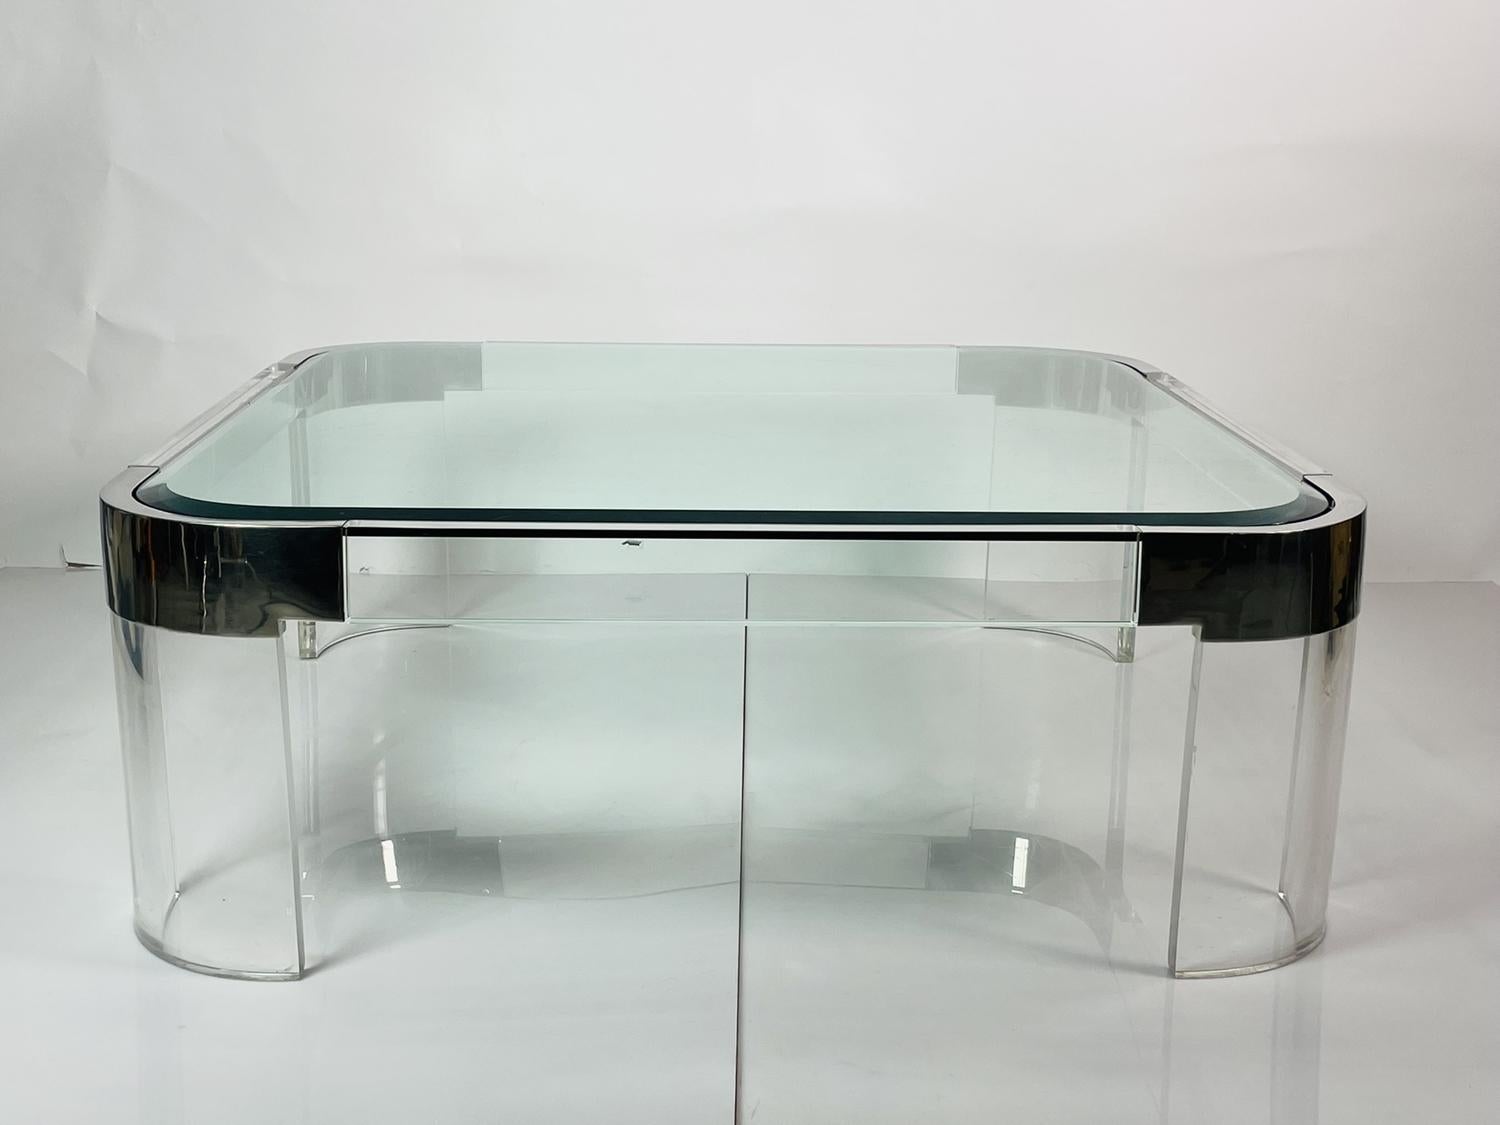 Plated Charles Hollis Jones Waterfall Coffee Table in Lucite, Glass & Polished Nickel For Sale